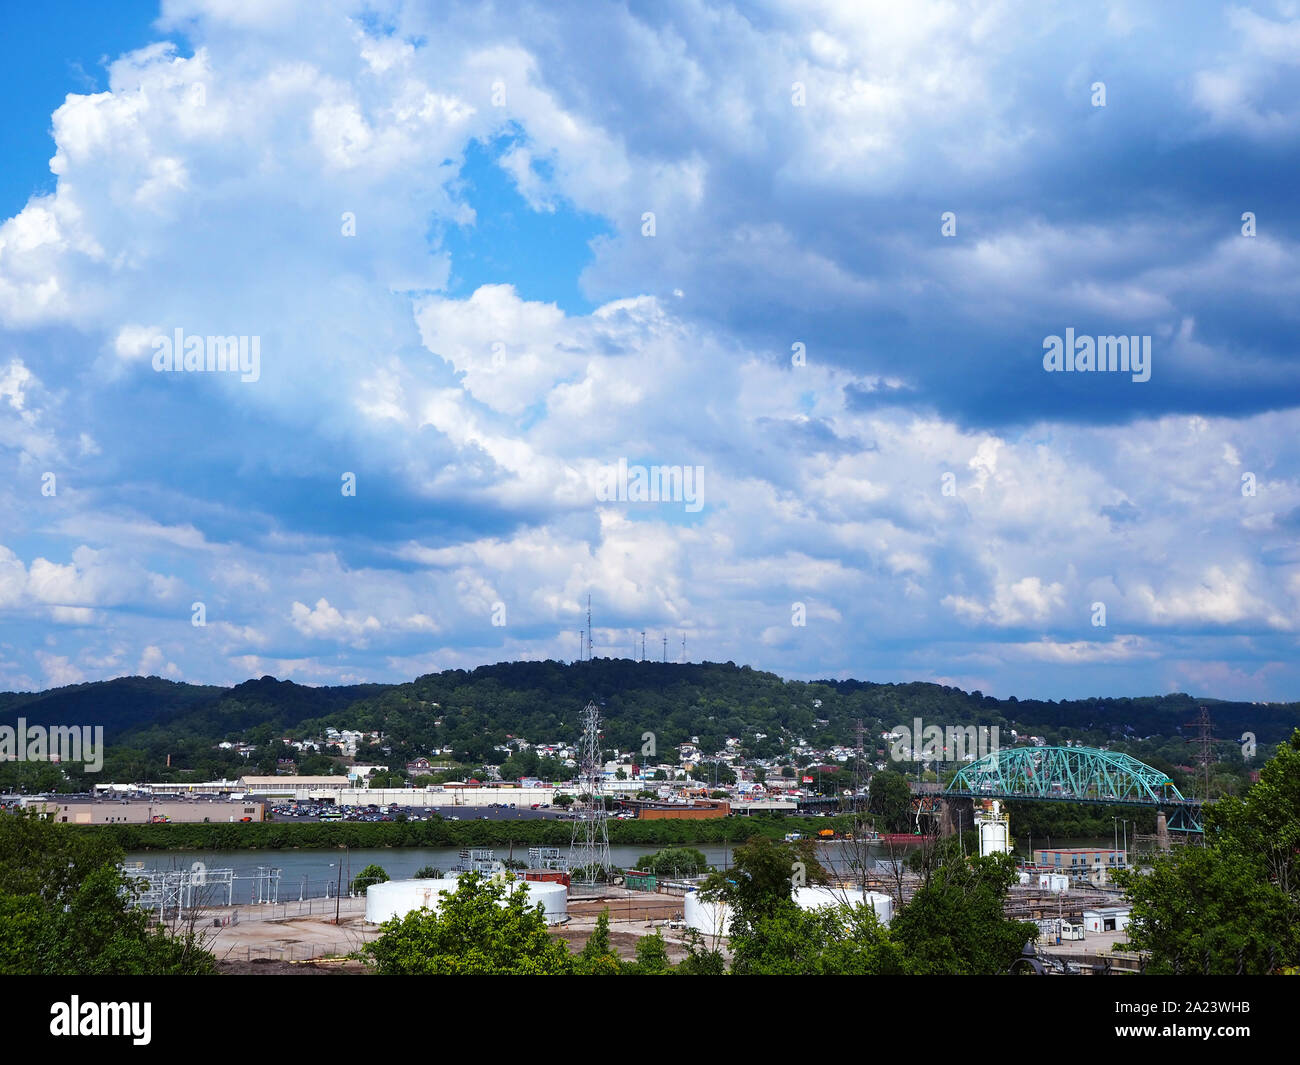 CHARLESTON, WEST VIRGINIA - JULY 26, 2019: The  Kanawha River running through the middle of Charleston, West Virginia, in the Appalacian Mountains. Stock Photo